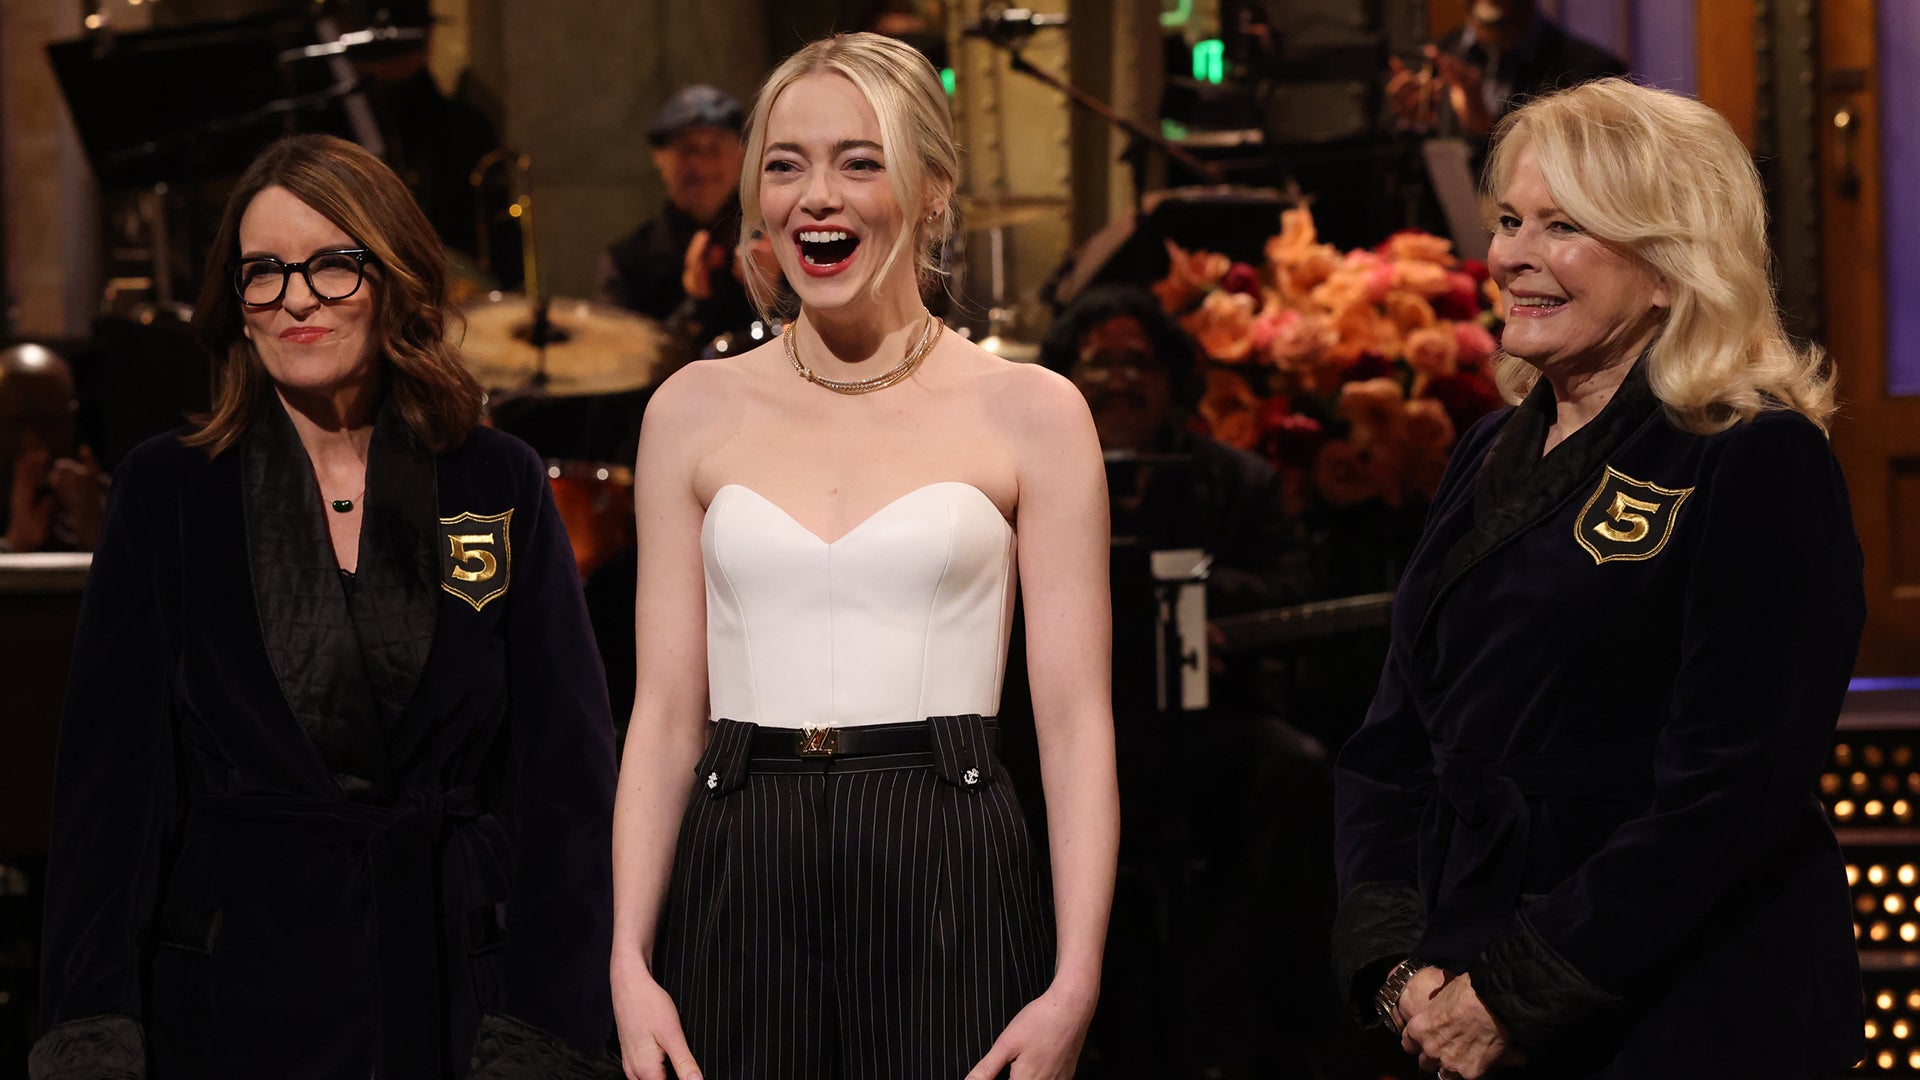 Emma Stone Joins 'SNL' Five-Timers Club With Special Help From Tina Fey and Candice Bergen  